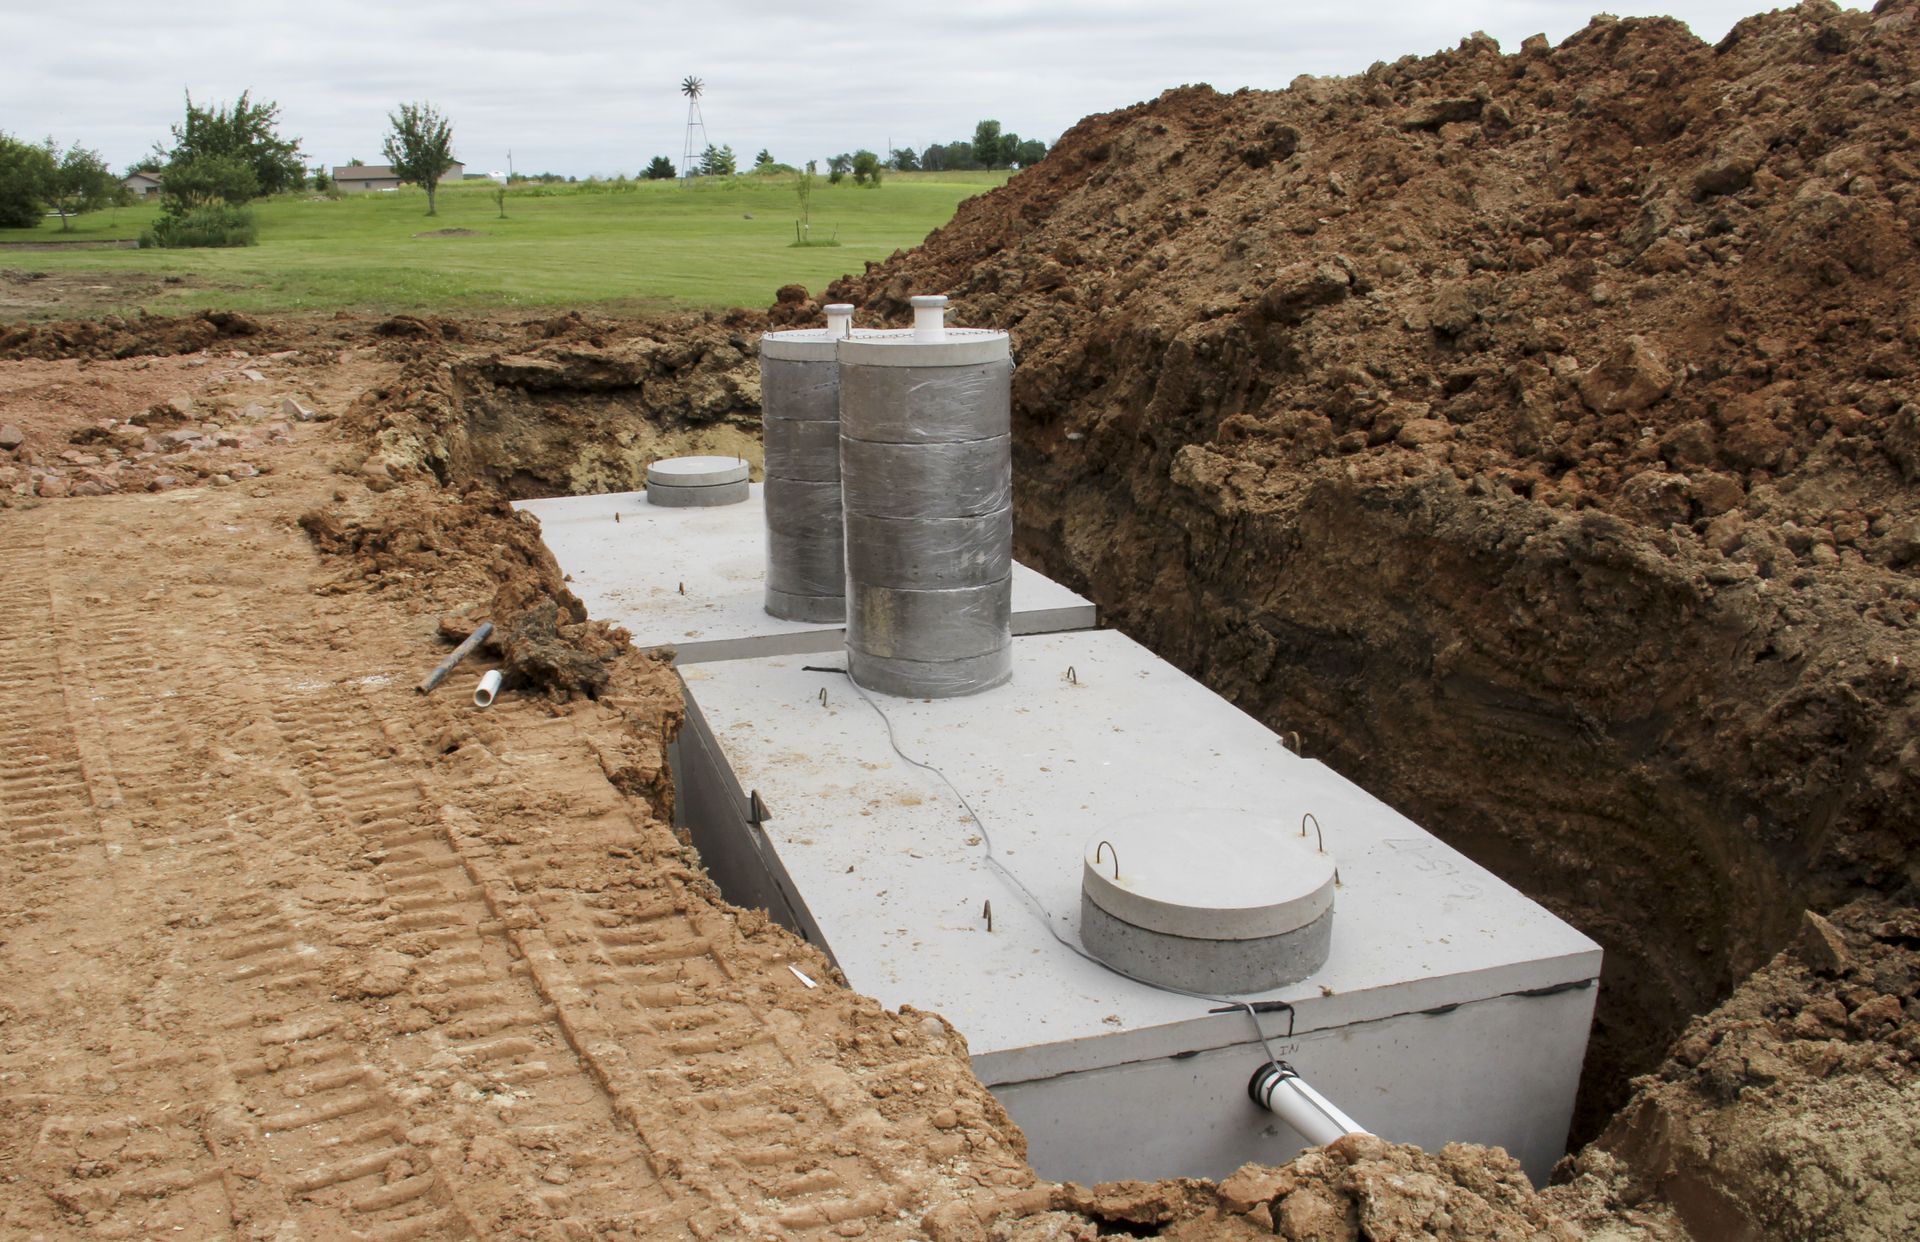 a septic tank is being built in a dirt field